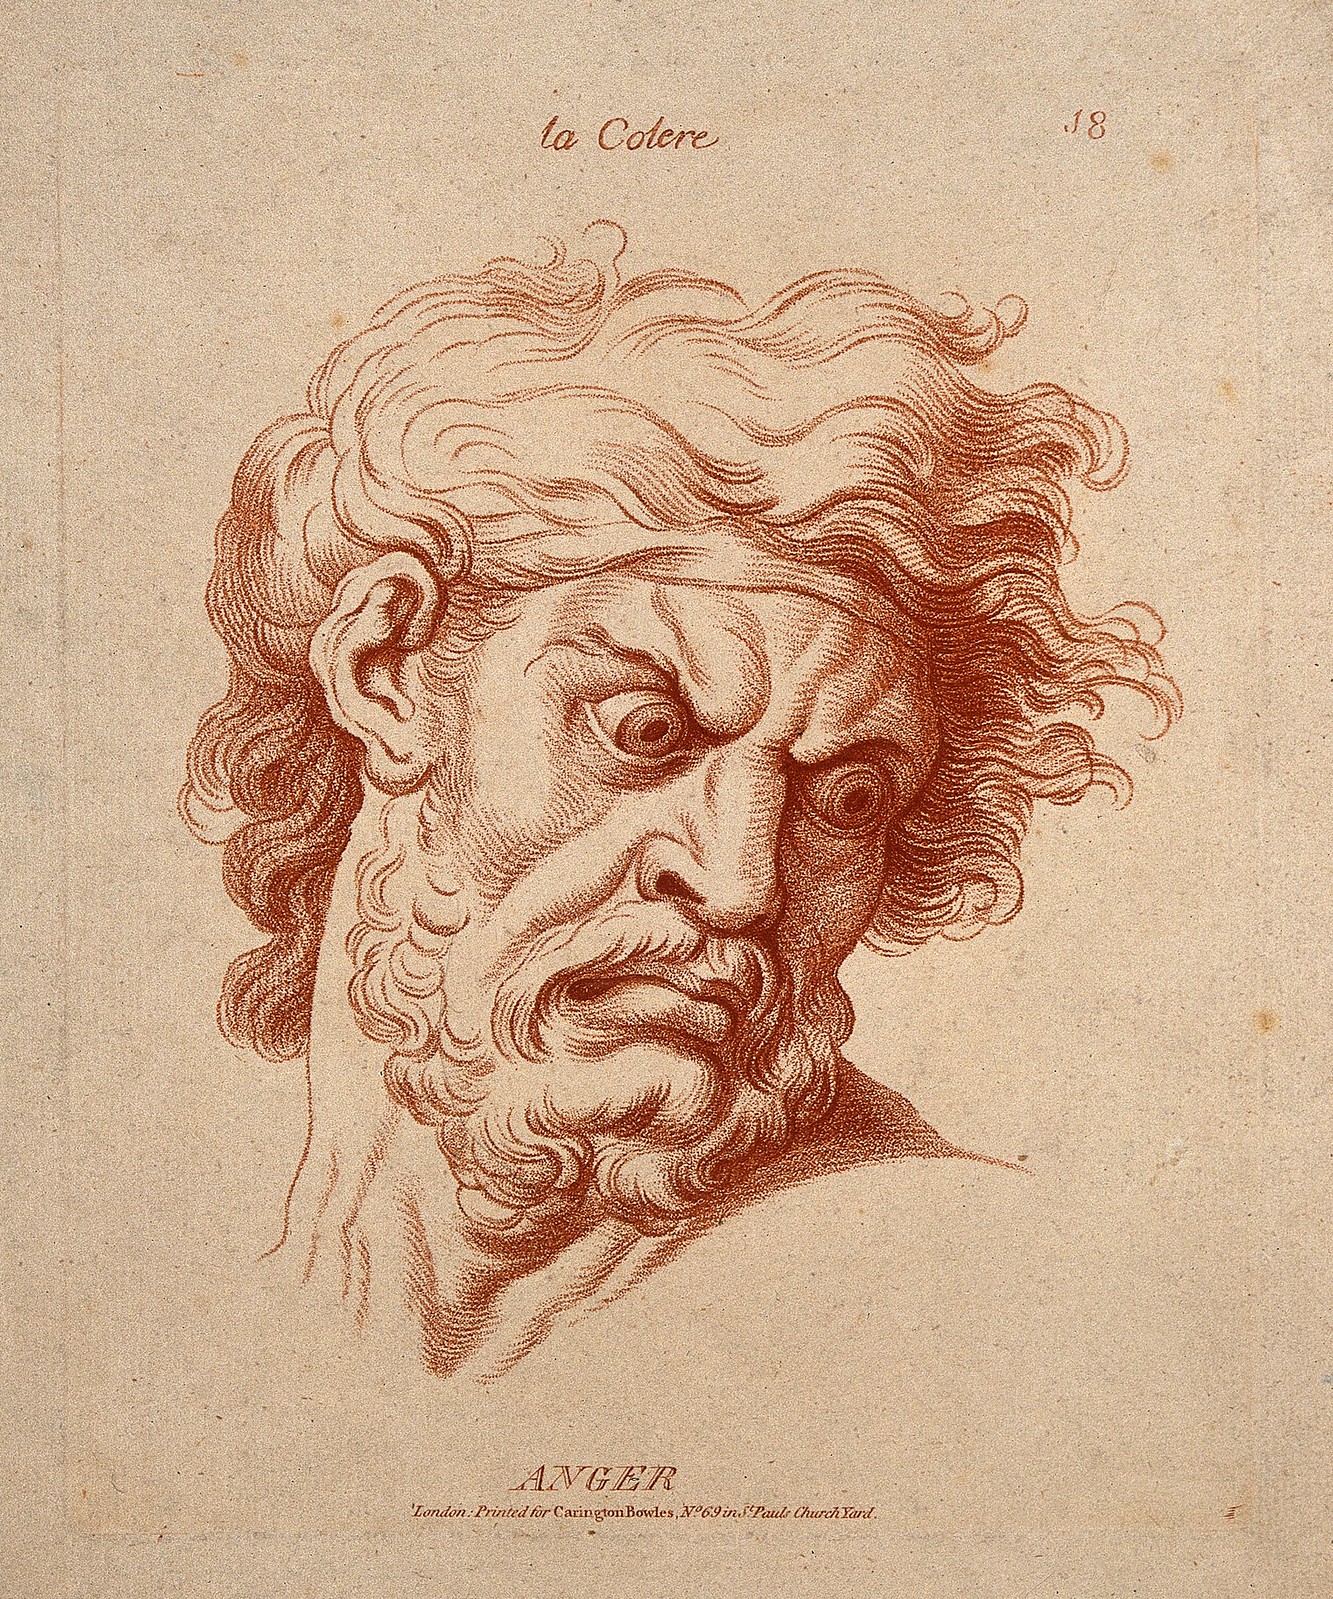 The face of a bearded man expressing anger. Etching in the crayon manner by W. Hebert, c. 1770, after C. Le Brun. Credit Wellcome Images